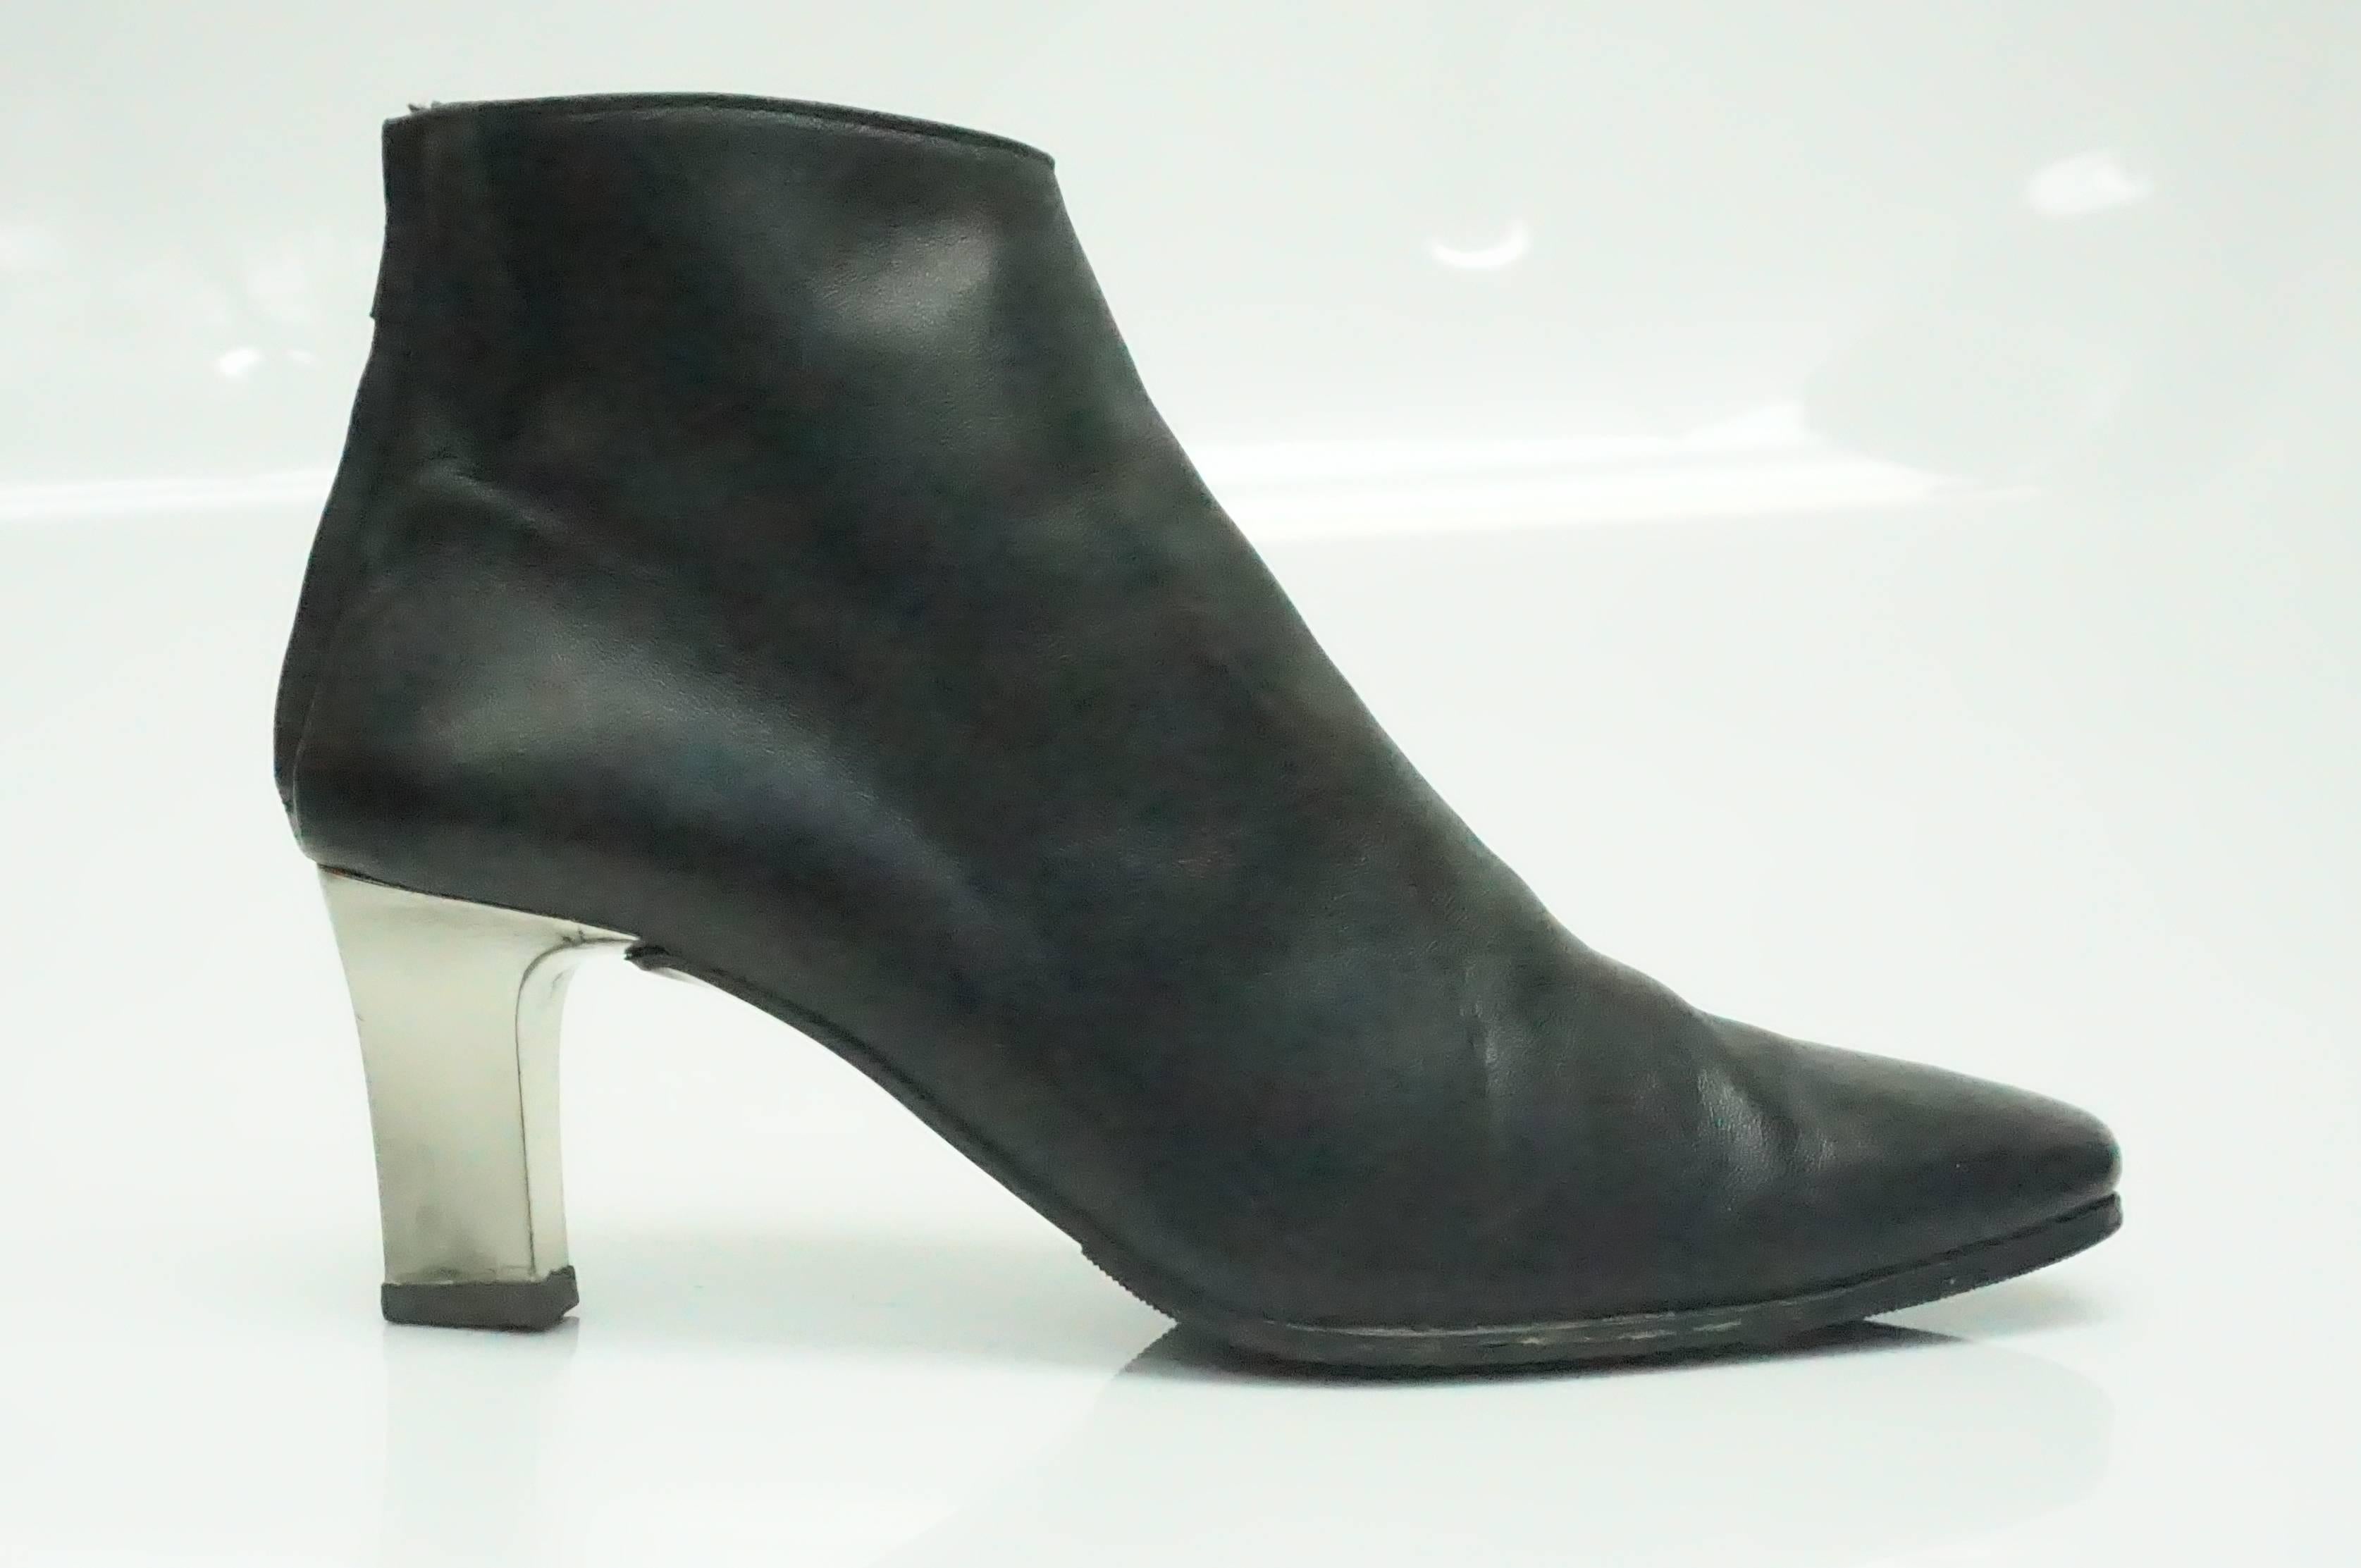 Ralph Lauren Black Leather Boots with Mirror Heels - 7. These amazing boots by Ralph Lauren Purple Label Collection are in good condition. The leather shows some sign of use and the bottoms have been re-done. They are made of black leather and have